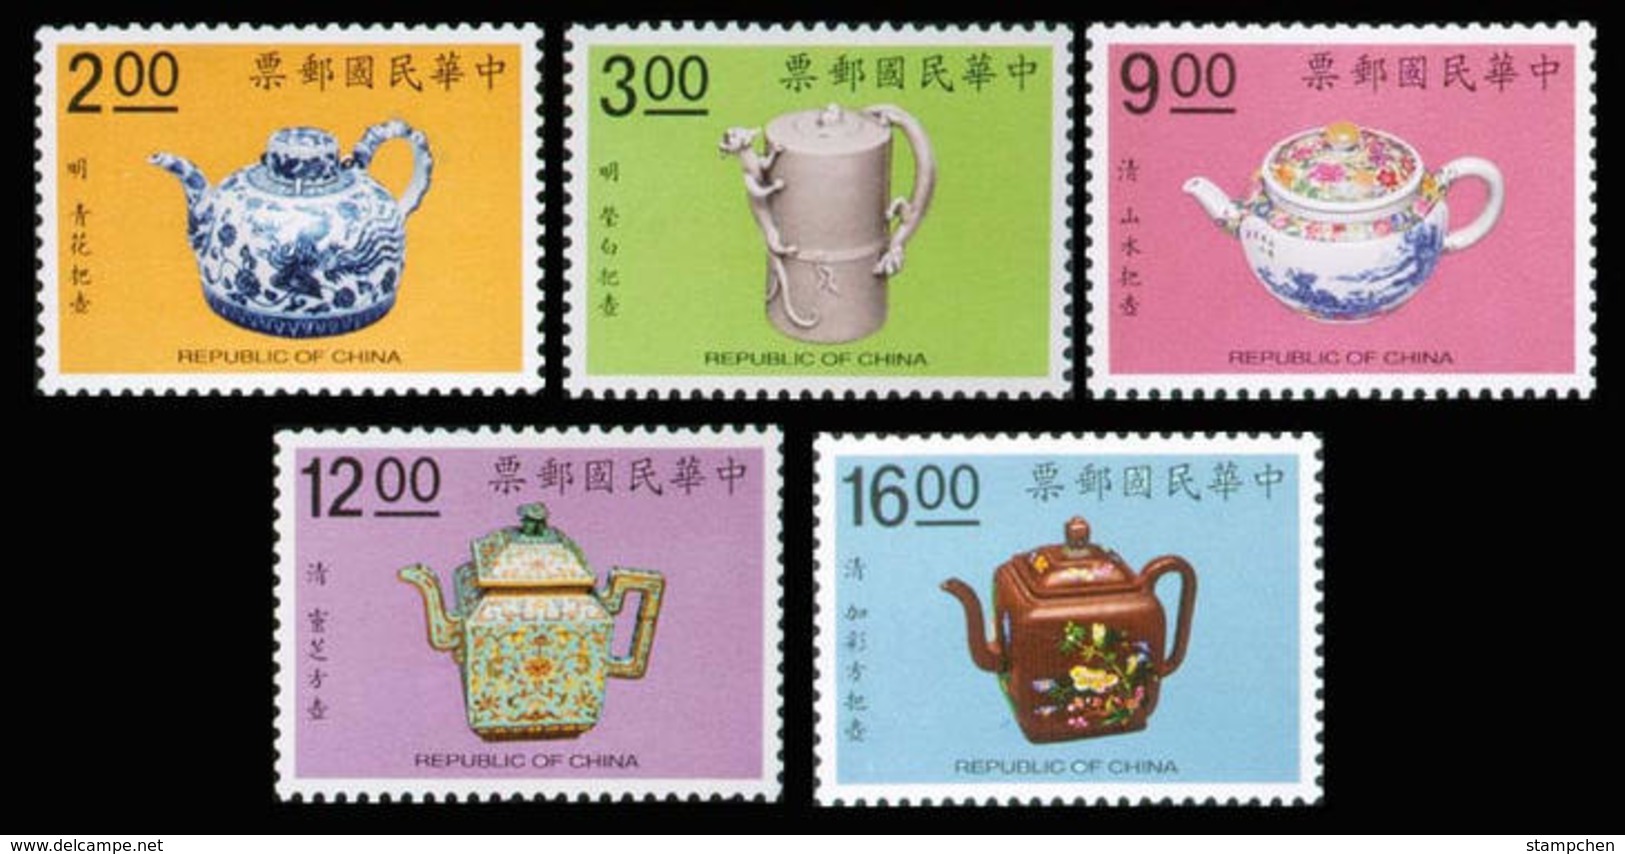 1991 Ancient Chinese Art Treasures Stamps - Teapot Flower Medicine - Musea